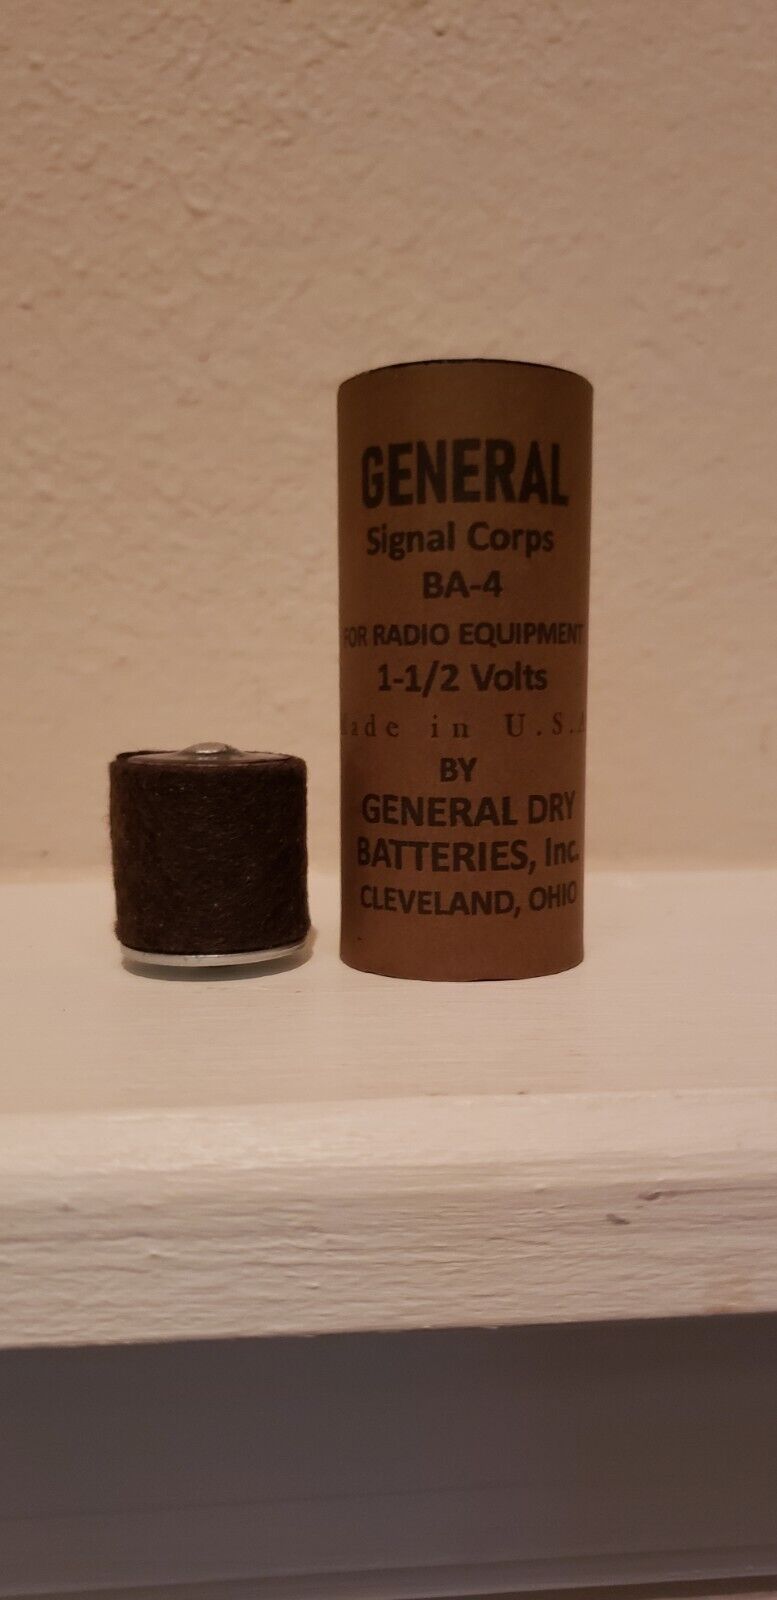 REPLACEMENT/REPRODUCTION GENERAL BA-4 FOR SIGNAL CORPS EQUIPMENT